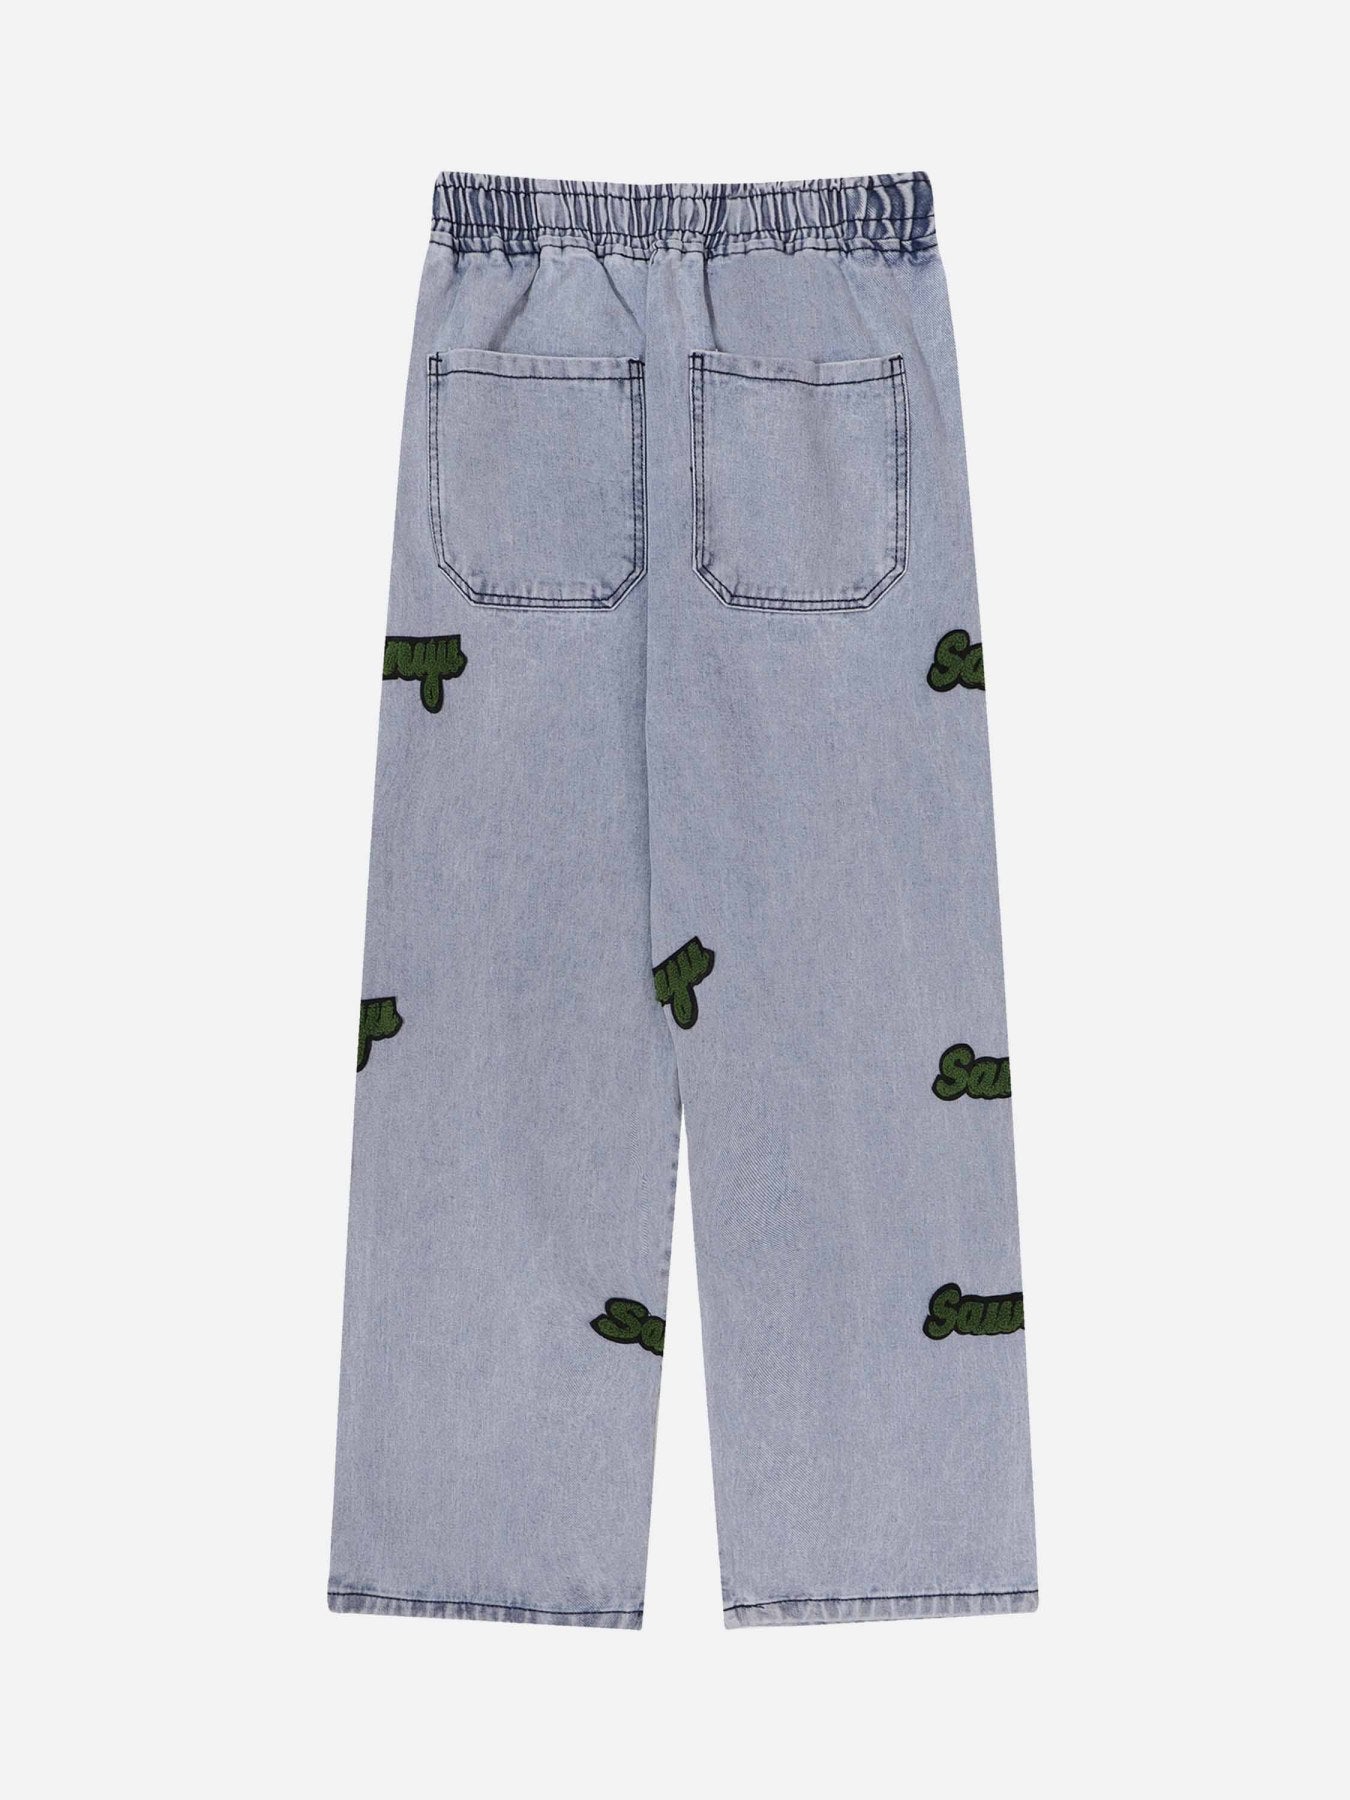 The Supermade Towel Embroidery Elastic Waist Jeans